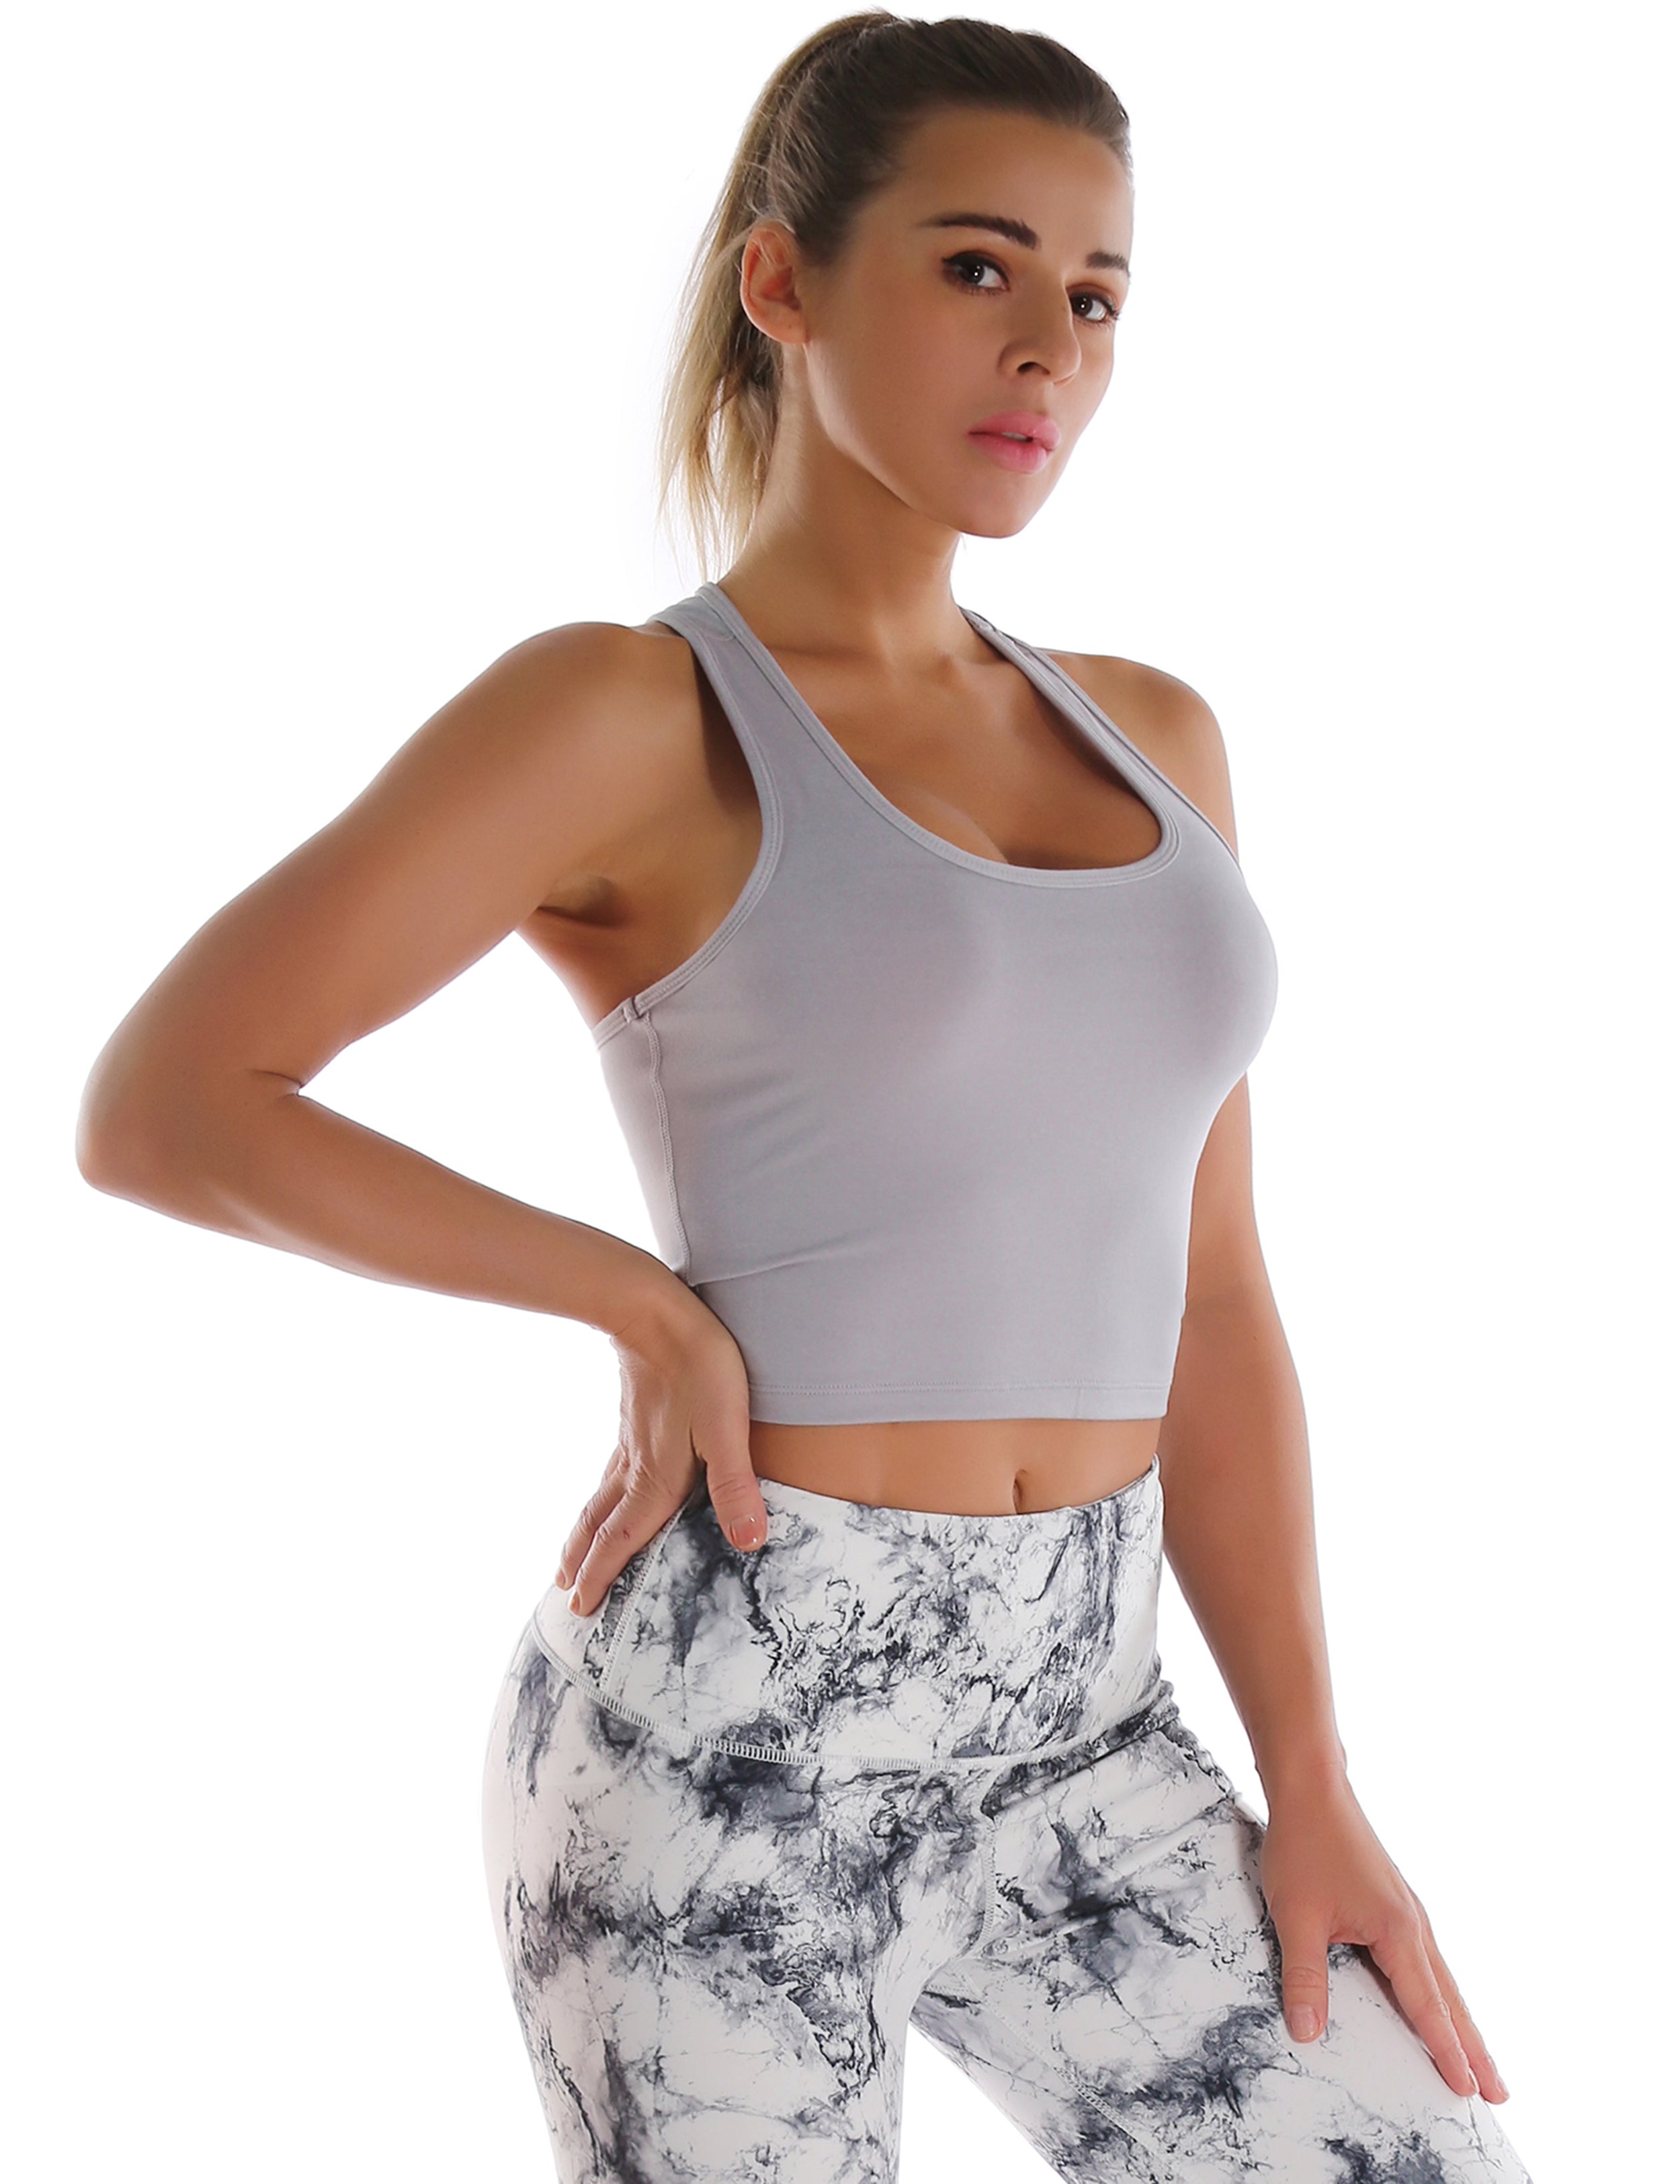 Racerback Athletic Crop Tank Tops heathergray 92%Nylon/8%Spandex(Cotton Soft) Designed for Yoga Tight Fit So buttery soft, it feels weightless Sweat-wicking Four-way stretch Breathable Contours your body Sits below the waistband for moderate, everyday coverage